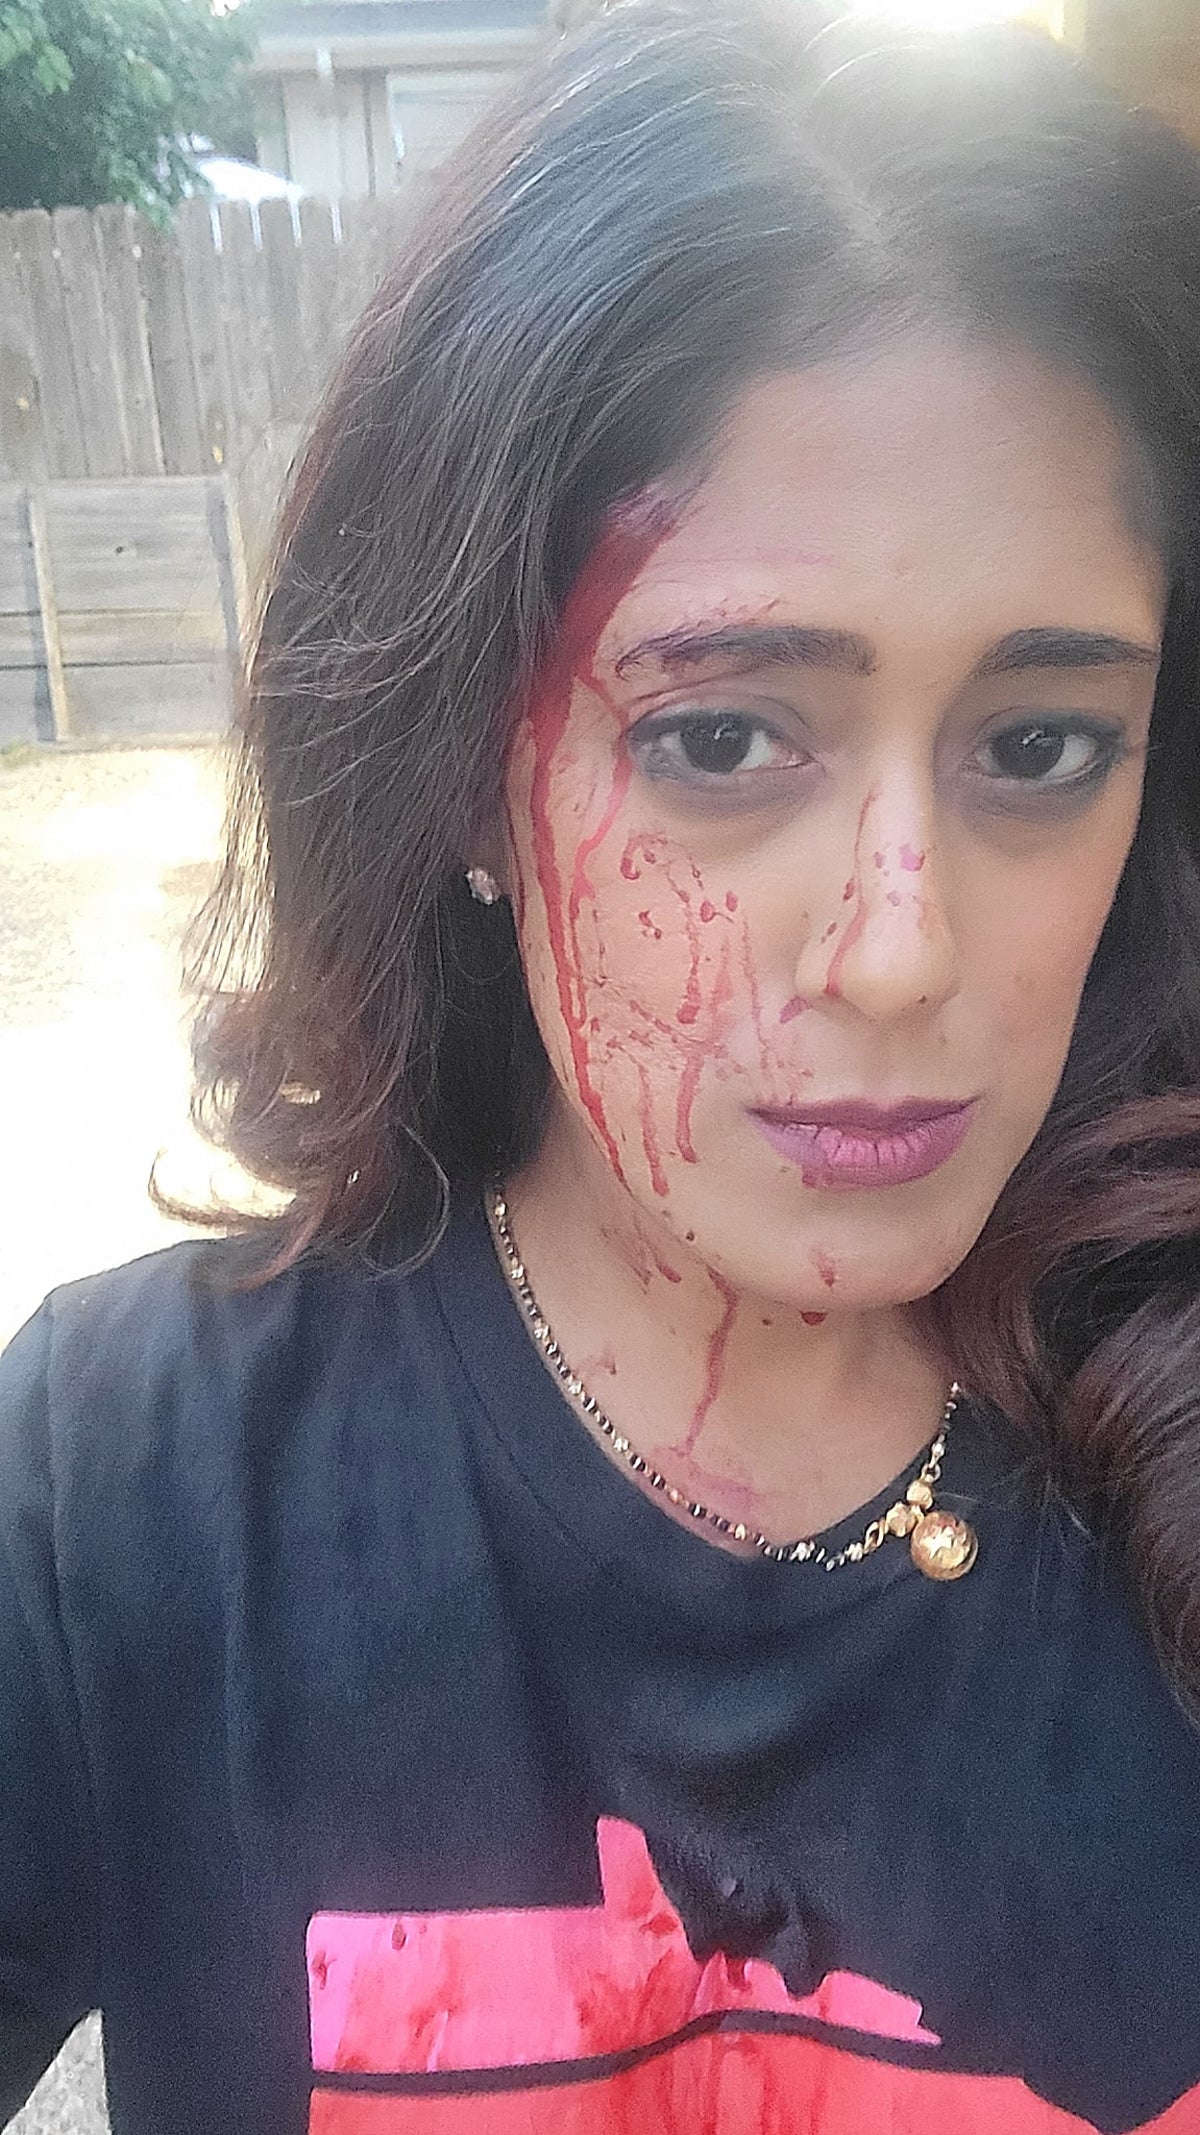 Democrat official shares bloody selfie after carjacking attack